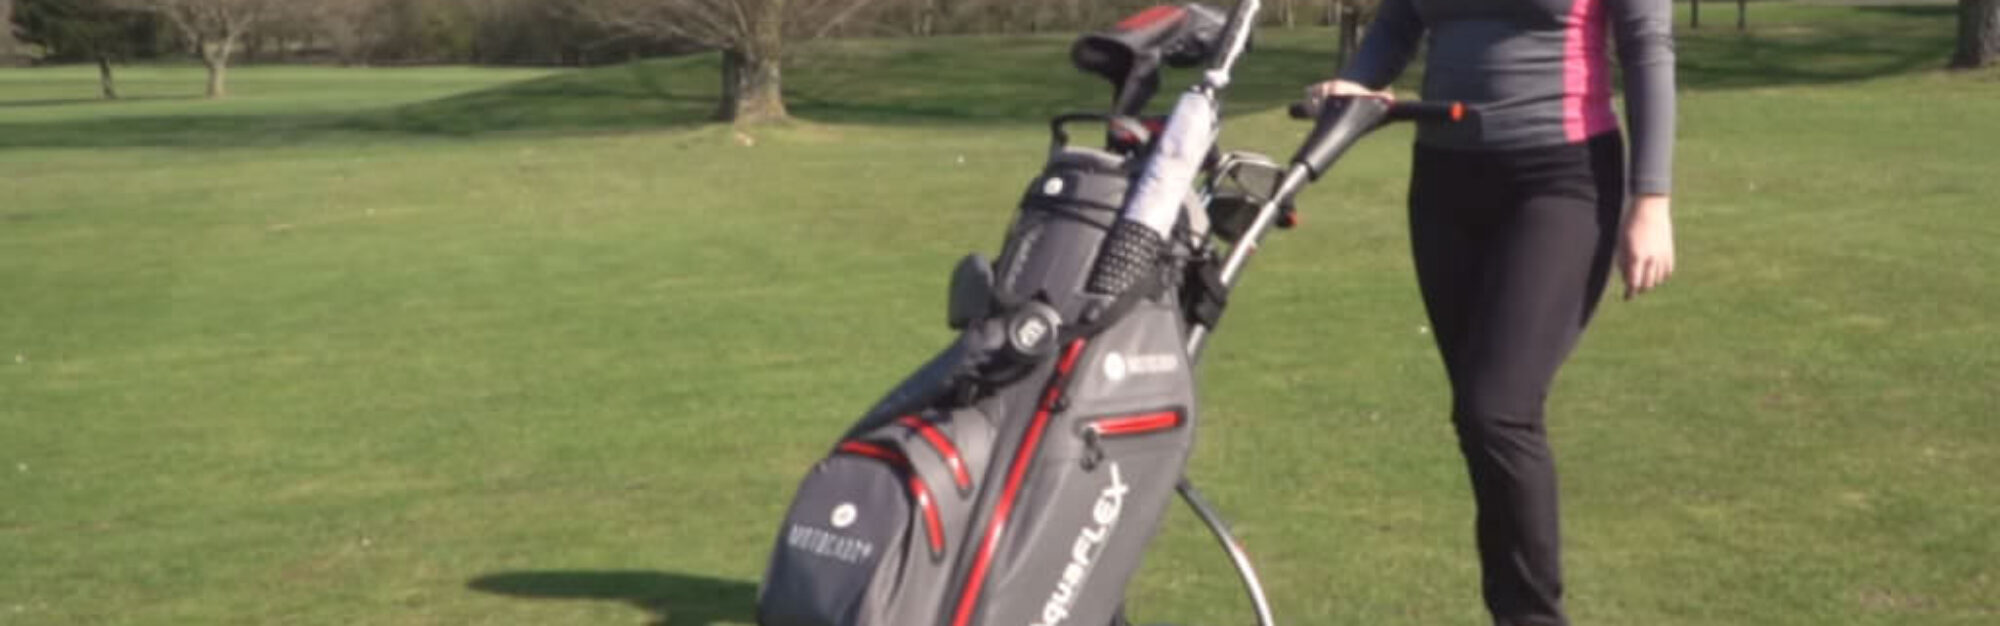 Review: Motocaddy S1 trolley